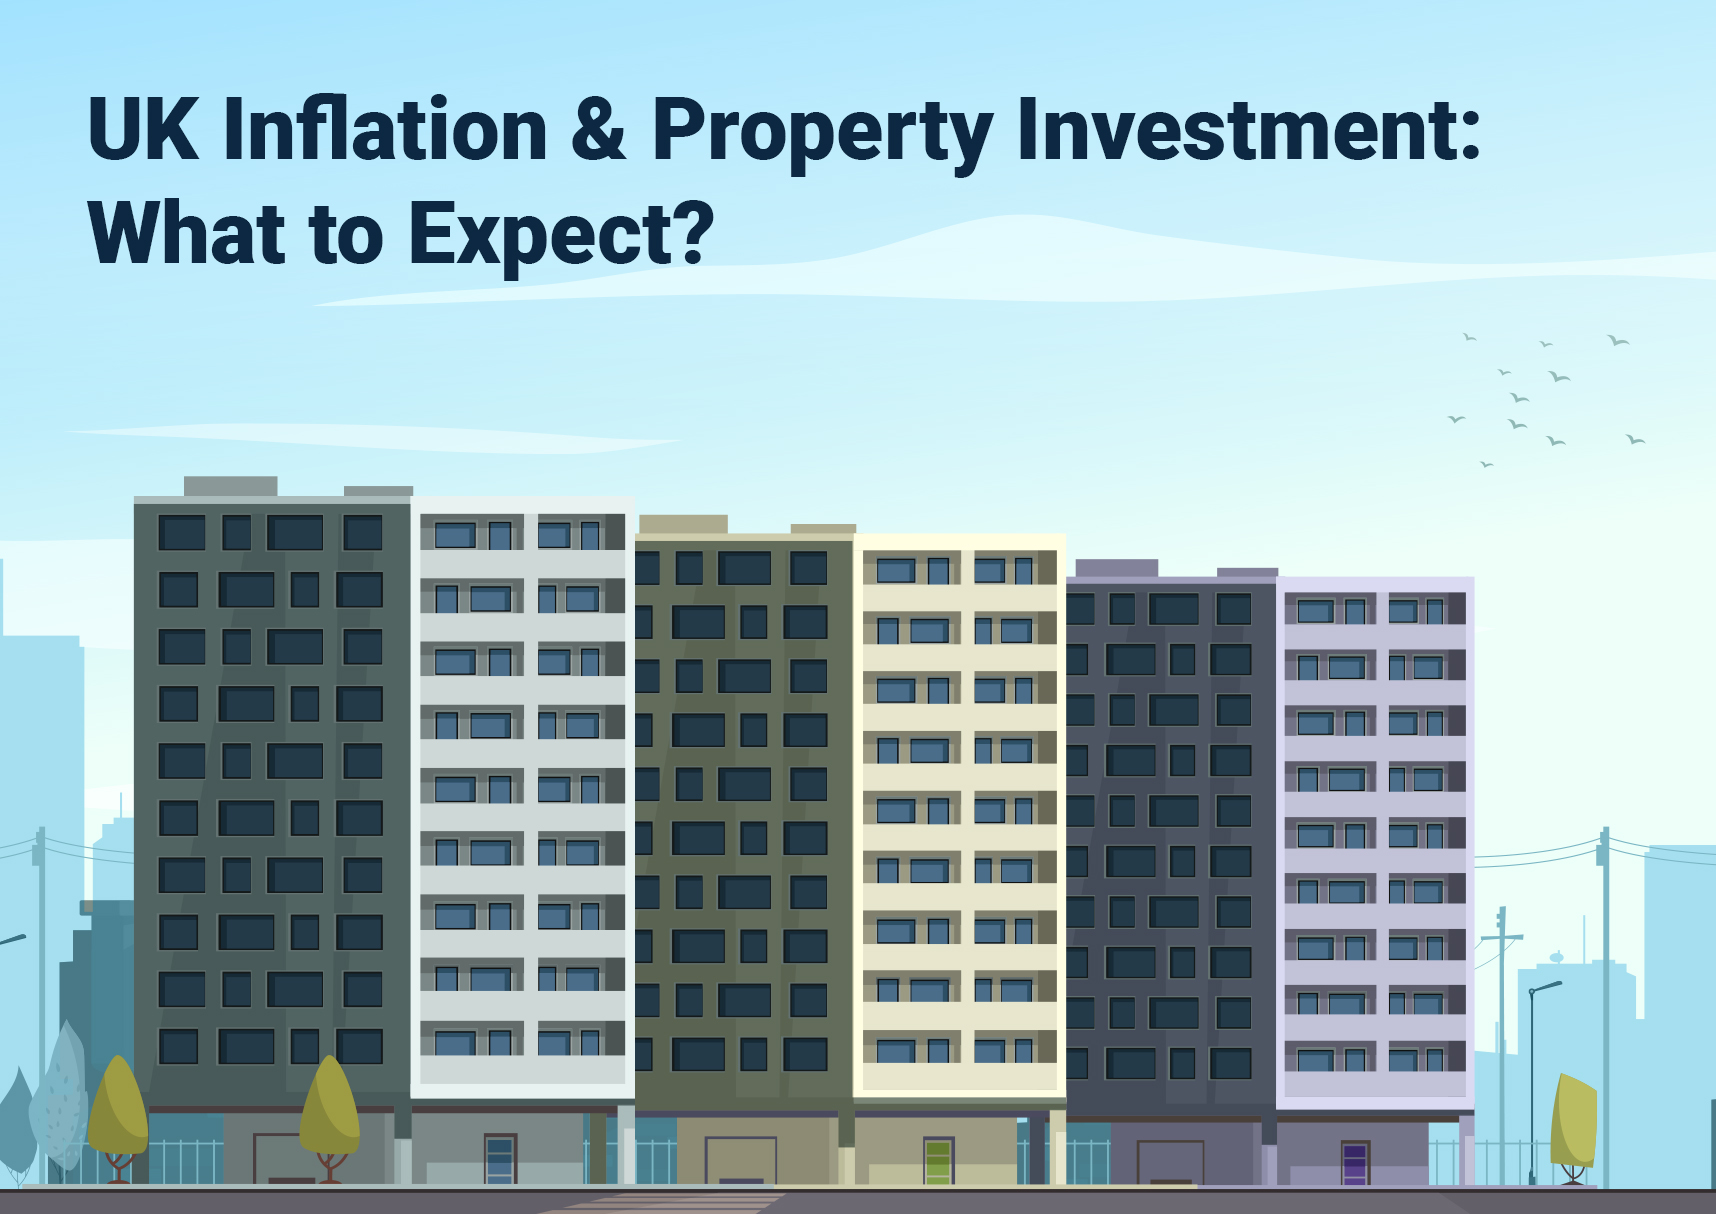 UK Inflation & Property Investment: What to Expect?